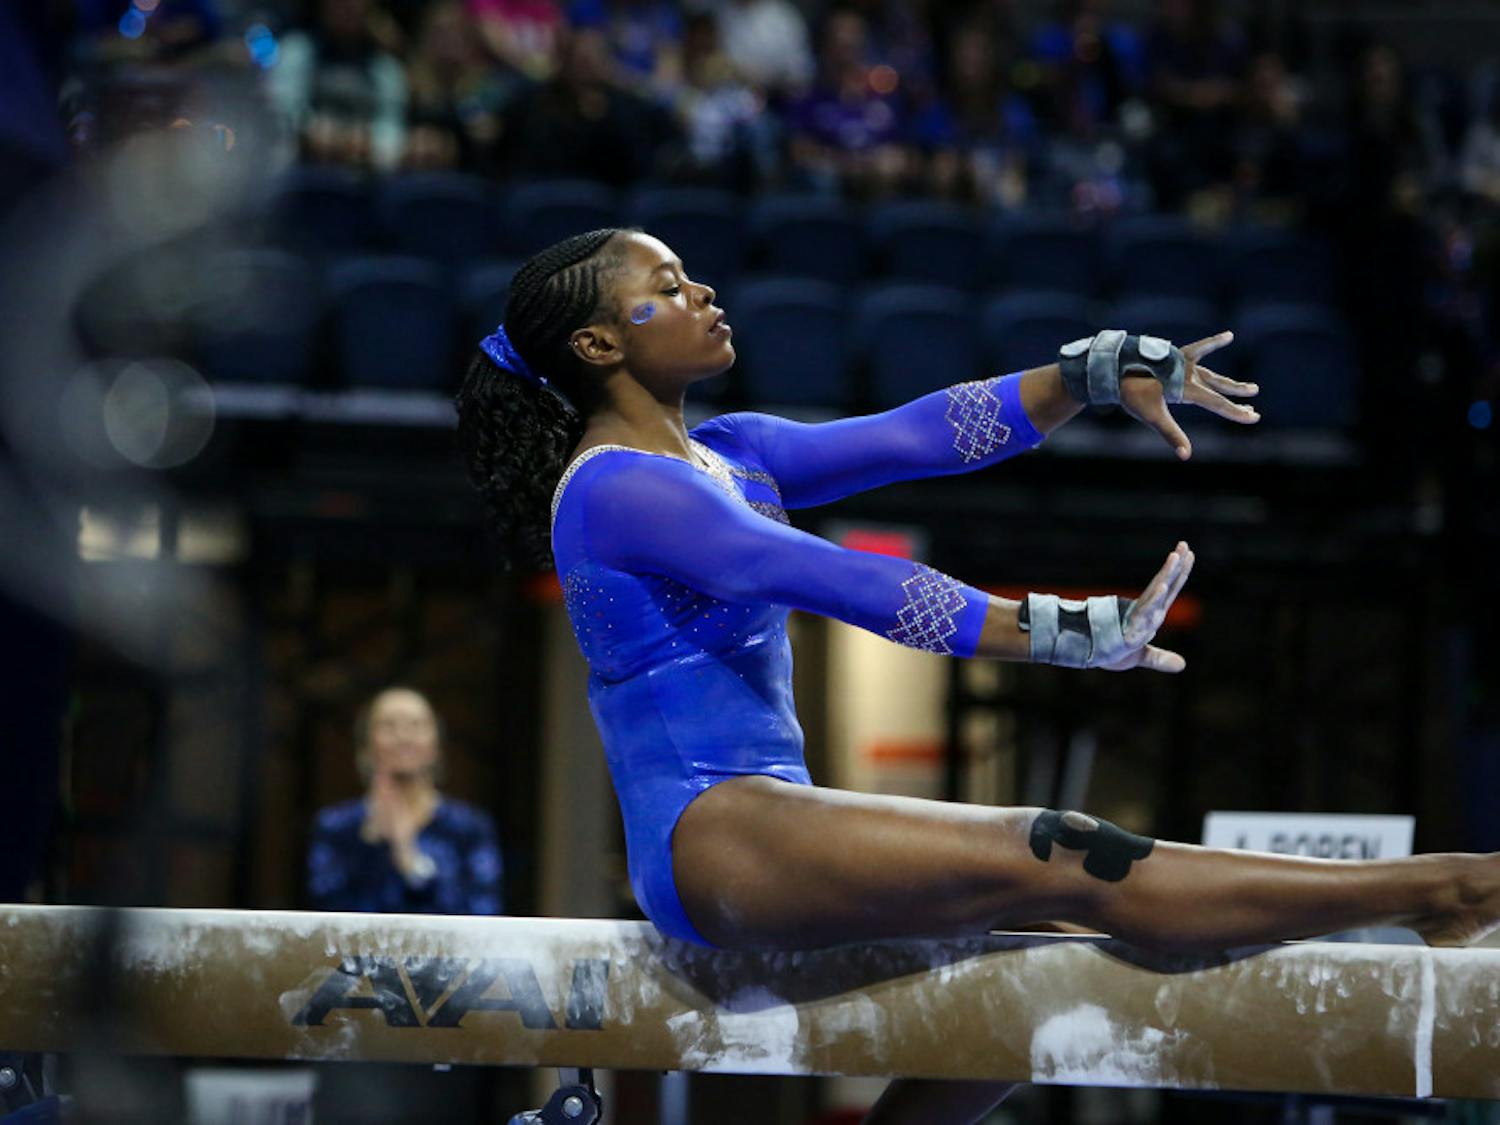 Junior Alicia Boren and the Florida gymnastics team are in St. Louis to compete in the NCAA Championships tonight at 7. Oklahoma, Utah, Washington, California and Kentucky are the other teams competing in UF's group.